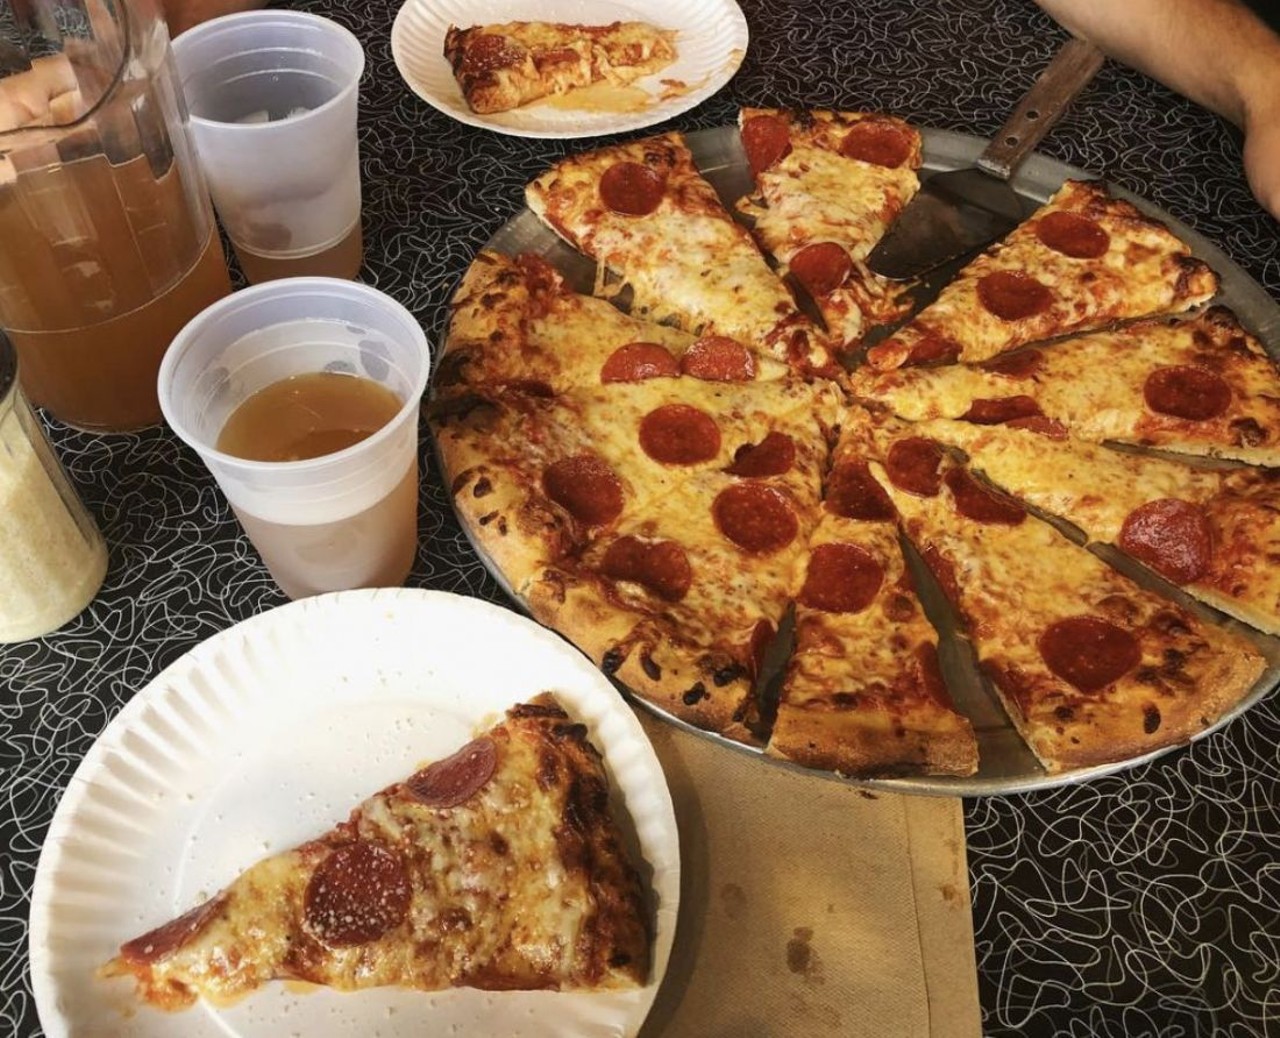 Garden Bowl
4120 Woodward Ave, Detroit, MI 48201
Pizzeria inside of Garden Bowl, Sgt. Pepperoni&#146;s, offers a $39.95 family deal, which includes a large gourmet pizza, large one-topping pizza, eight wings, garden salad, 2 liter soda, and breadsticks.
Photo courtesy of @bhweaver